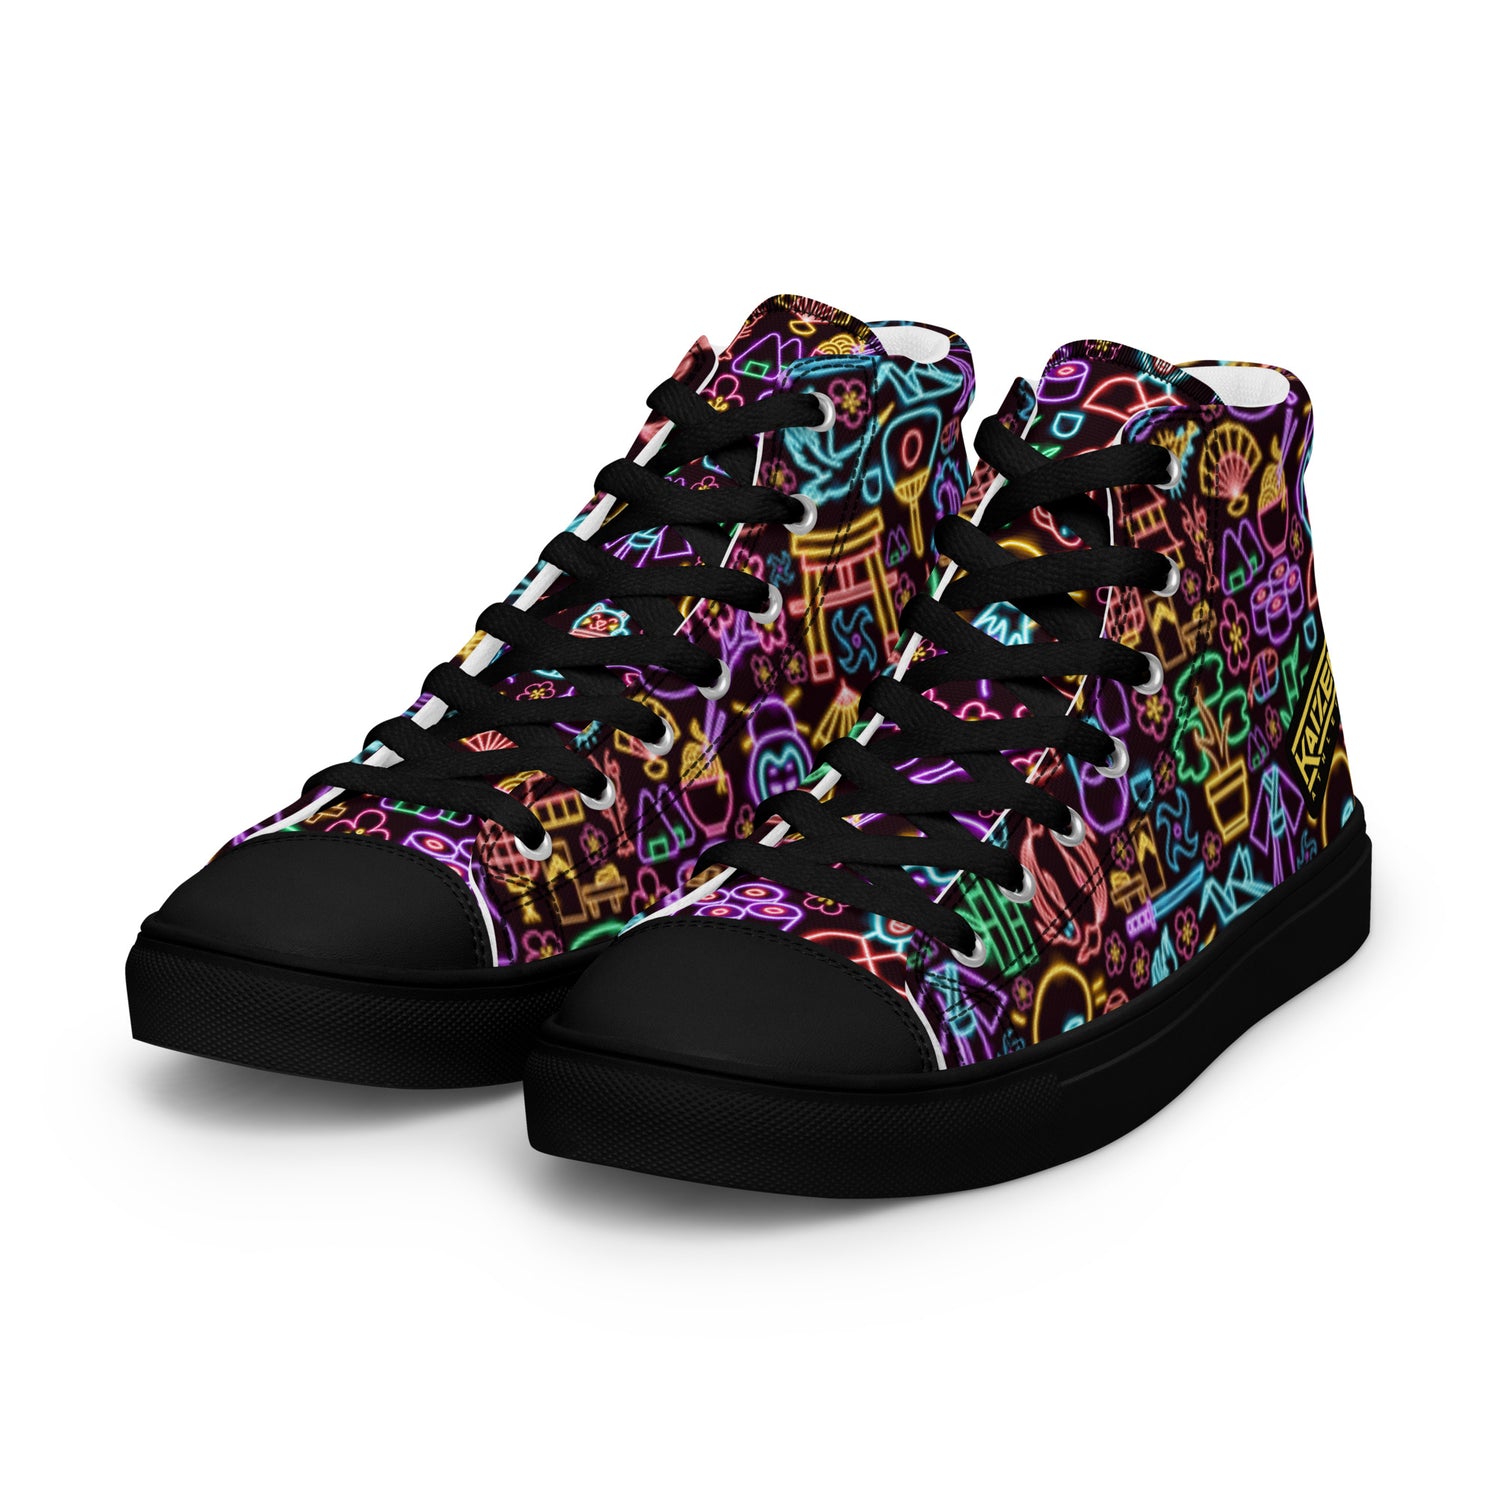 Neon Nights Men’s High top Canvas Shoes by Kaizen Athletic